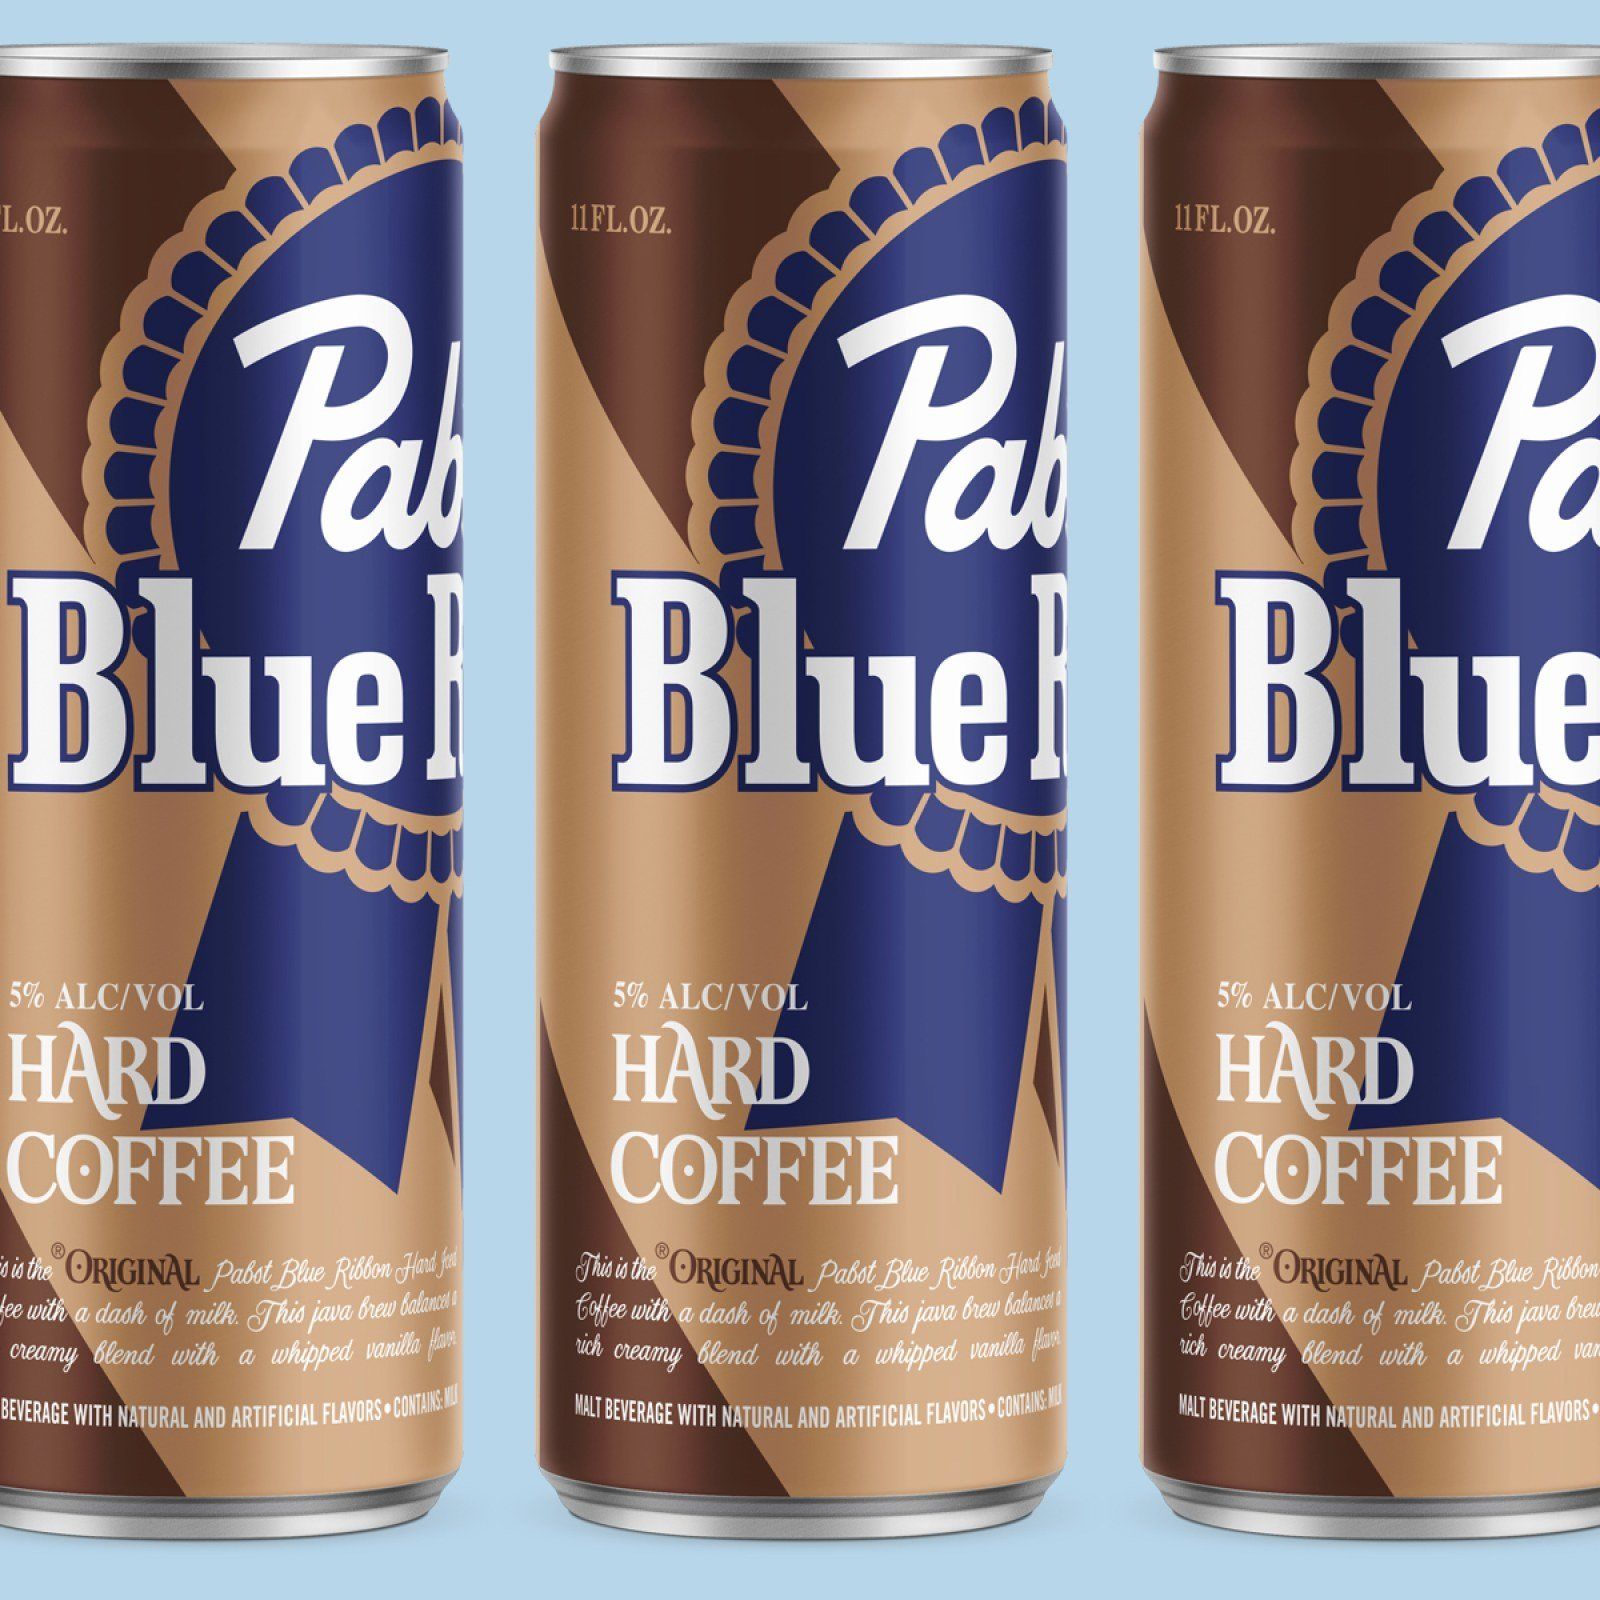 PBR Just Released Hard Coffee For The Perfect Mix Of Booze And Caffeine